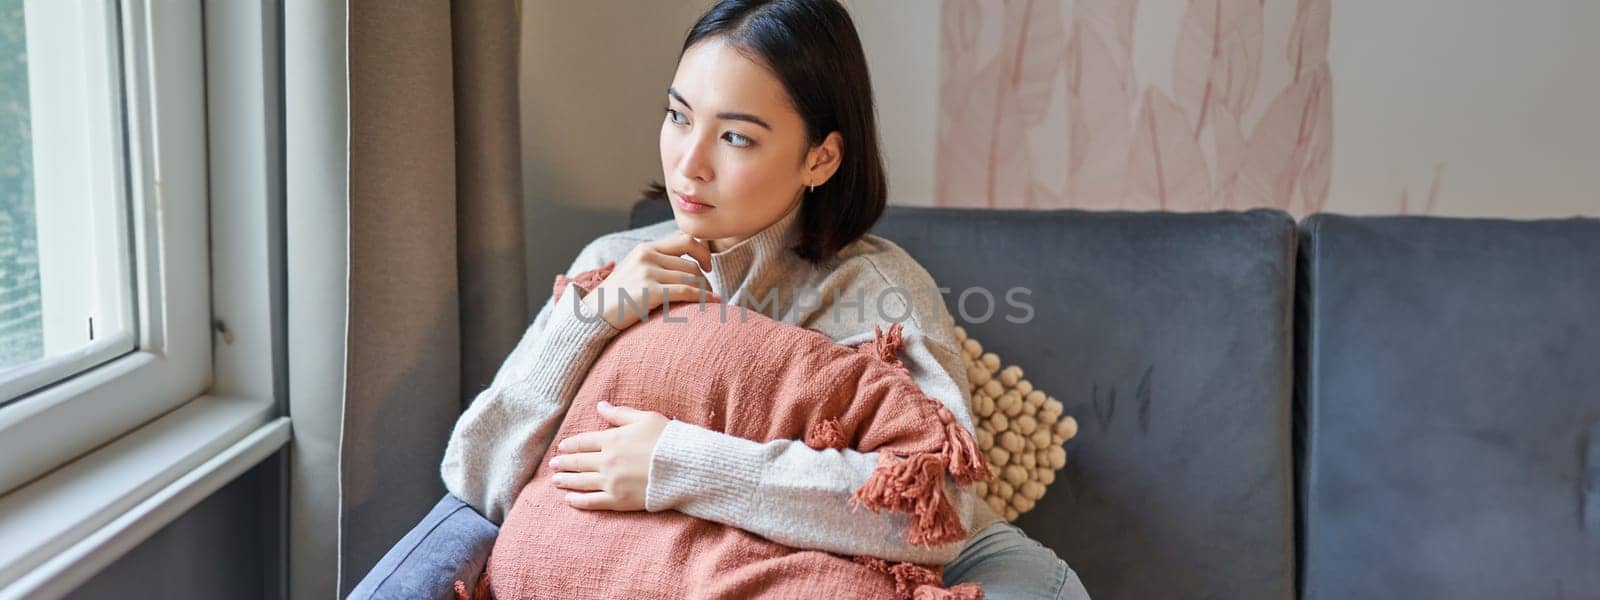 Portrait of asian woman feeling cozy in her home, hugging pillow on sofa and looking thoughtful, smiling.